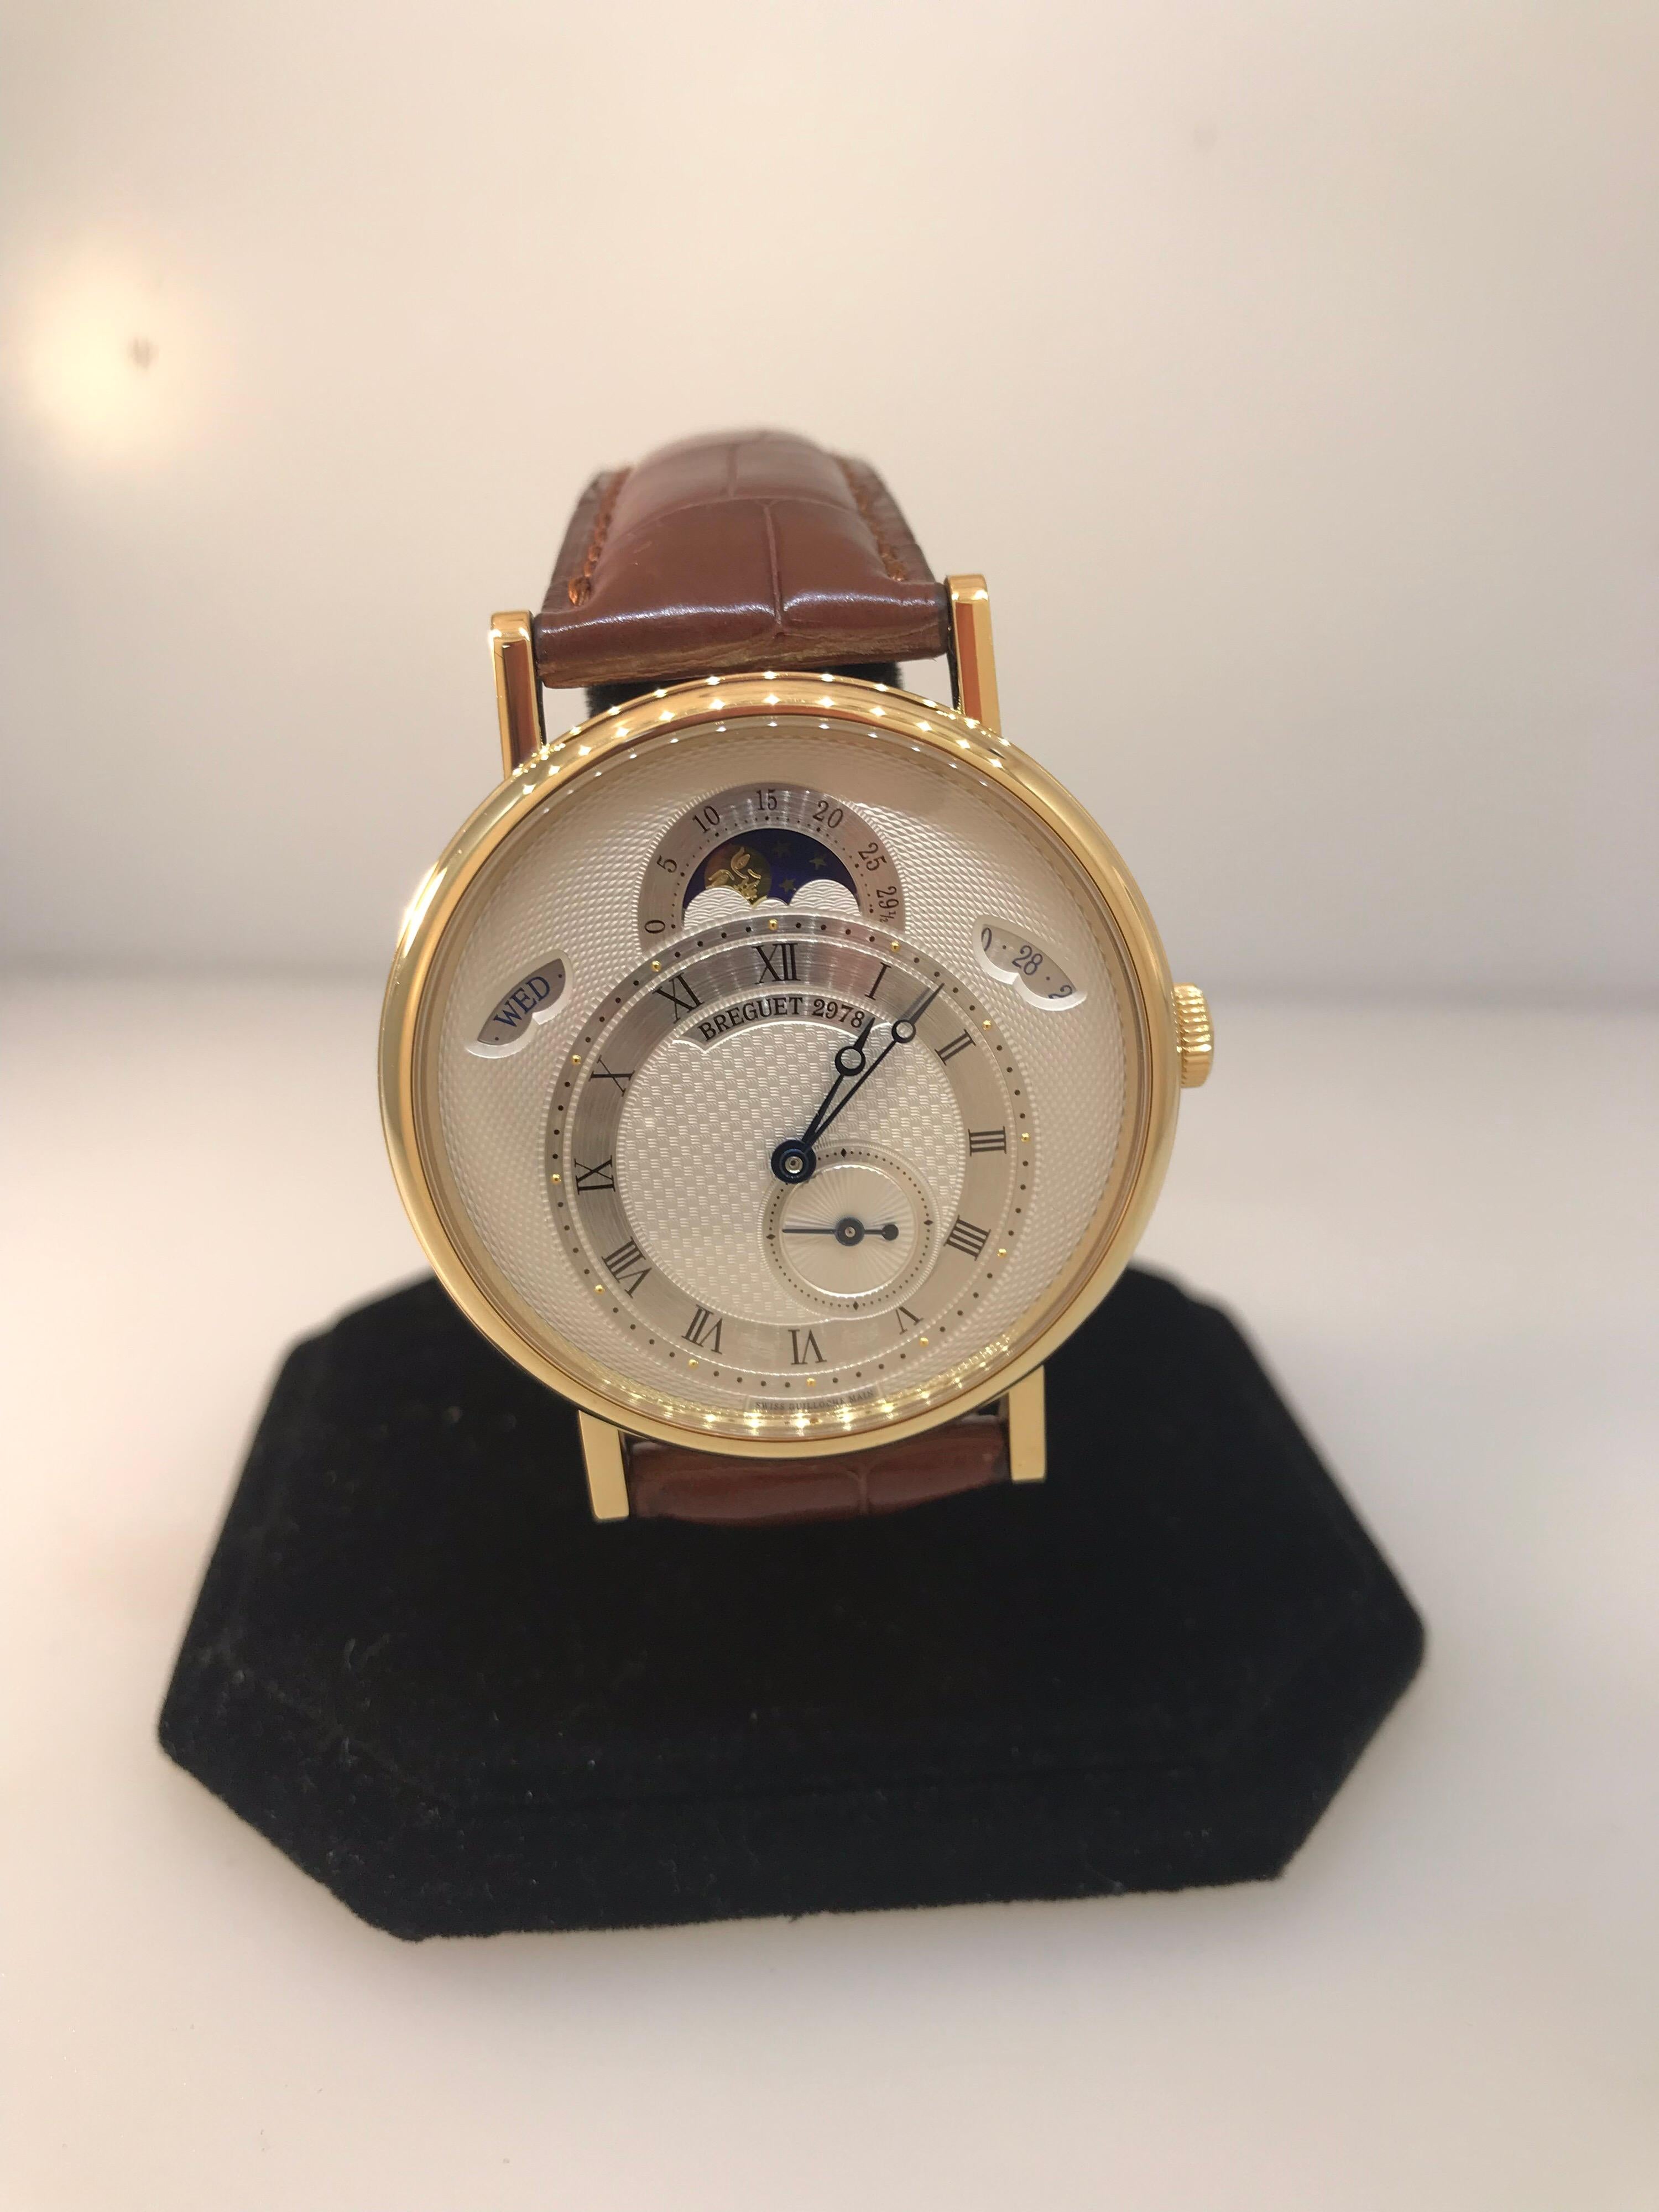 Breguet Classique Men's Watch

Model Number: 7337ba/1e/9v6

100% Authentic

Brand New

Comes with original Breguet box and papers

18 Karat Yellow Gold

Silver Dial

Case Diameter: 39mm

Swiss made automatic movement

Features: Day, Date,